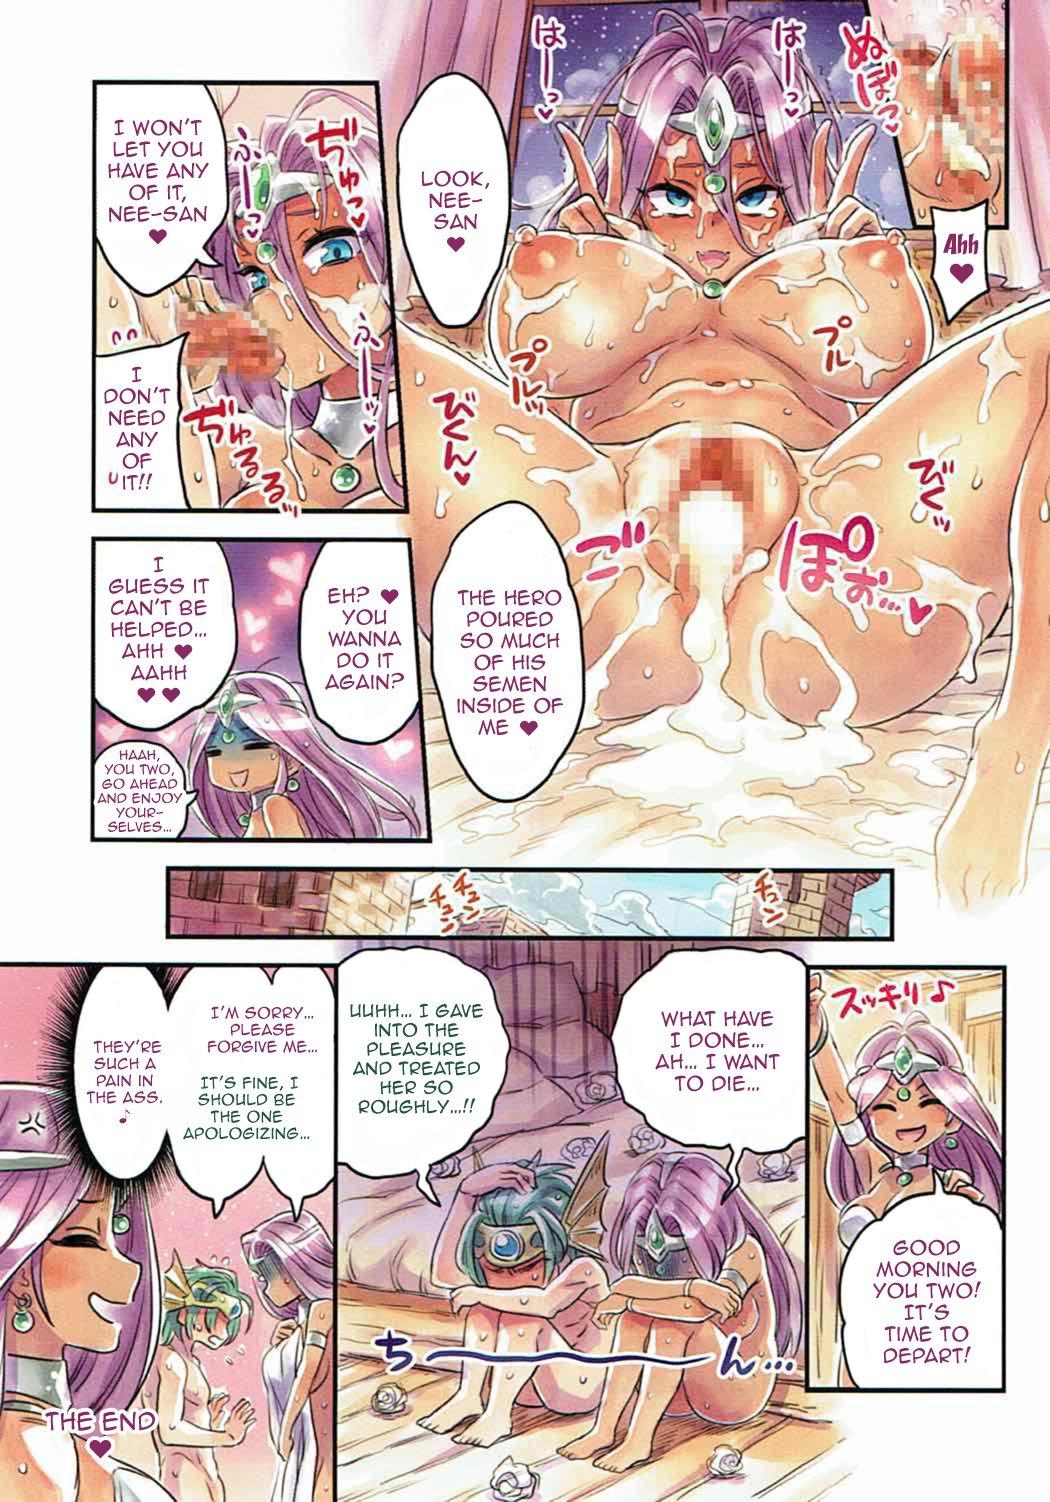 Swallowing (C89) [Mimoneland (Mimonel)] Nakama to Issen Koechau Hon ~DQ Hen~ | A Book About Crossing The Line With Companions ~DQ Edition~ (Dragon Quest) [English] {Doujins.com} - Dragon quest Hot Naked Girl - Page 8